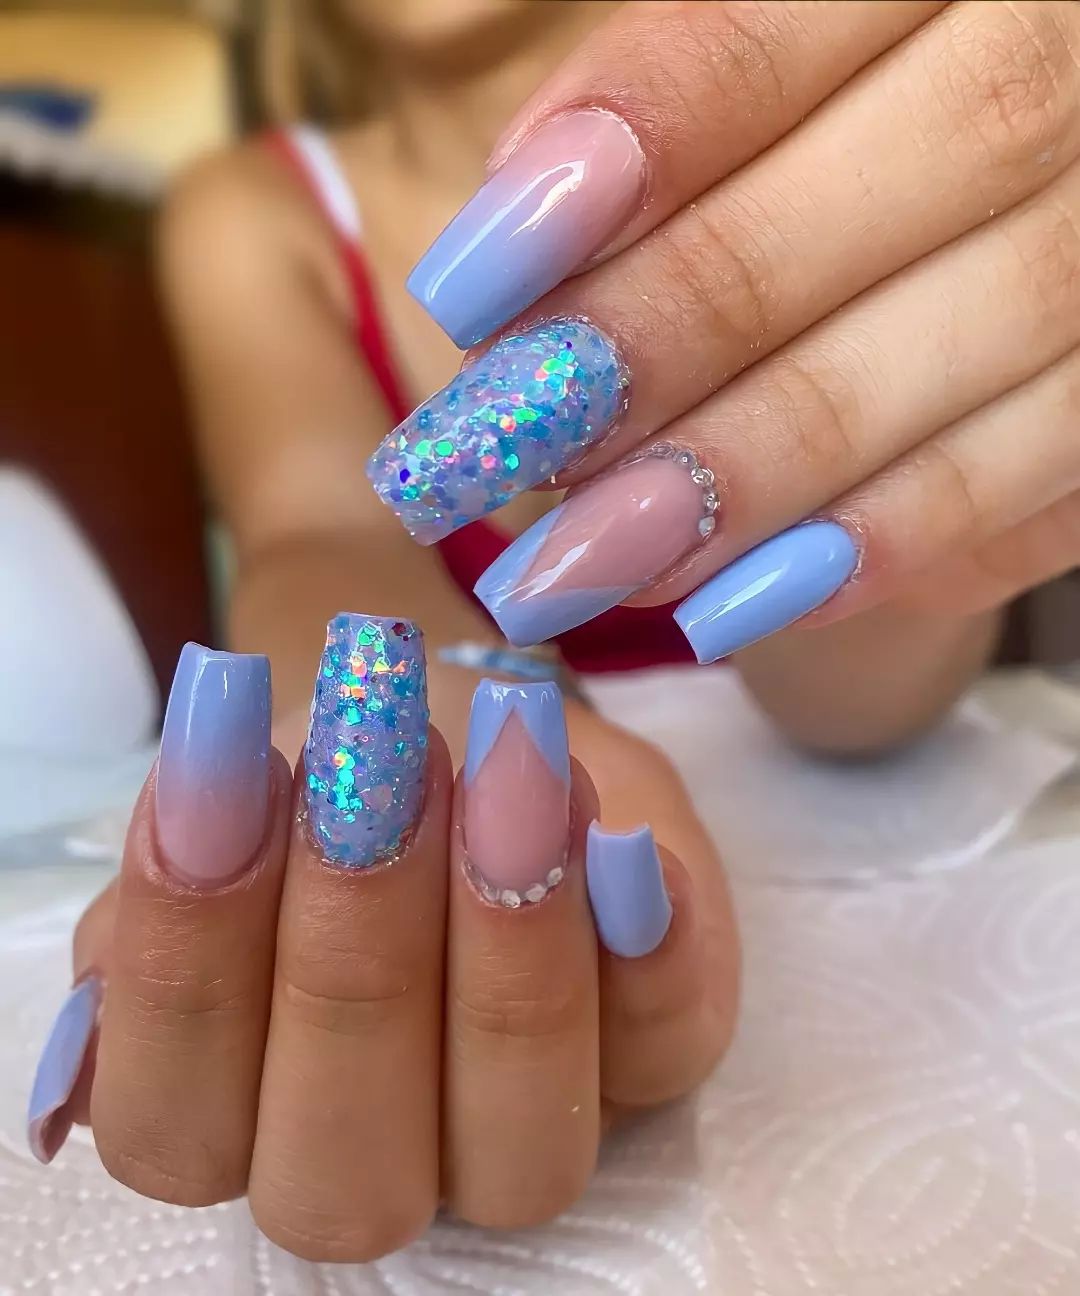 Those who want to use different nail designs for each nails should definitely give this nail style a shot. You will look amazing.